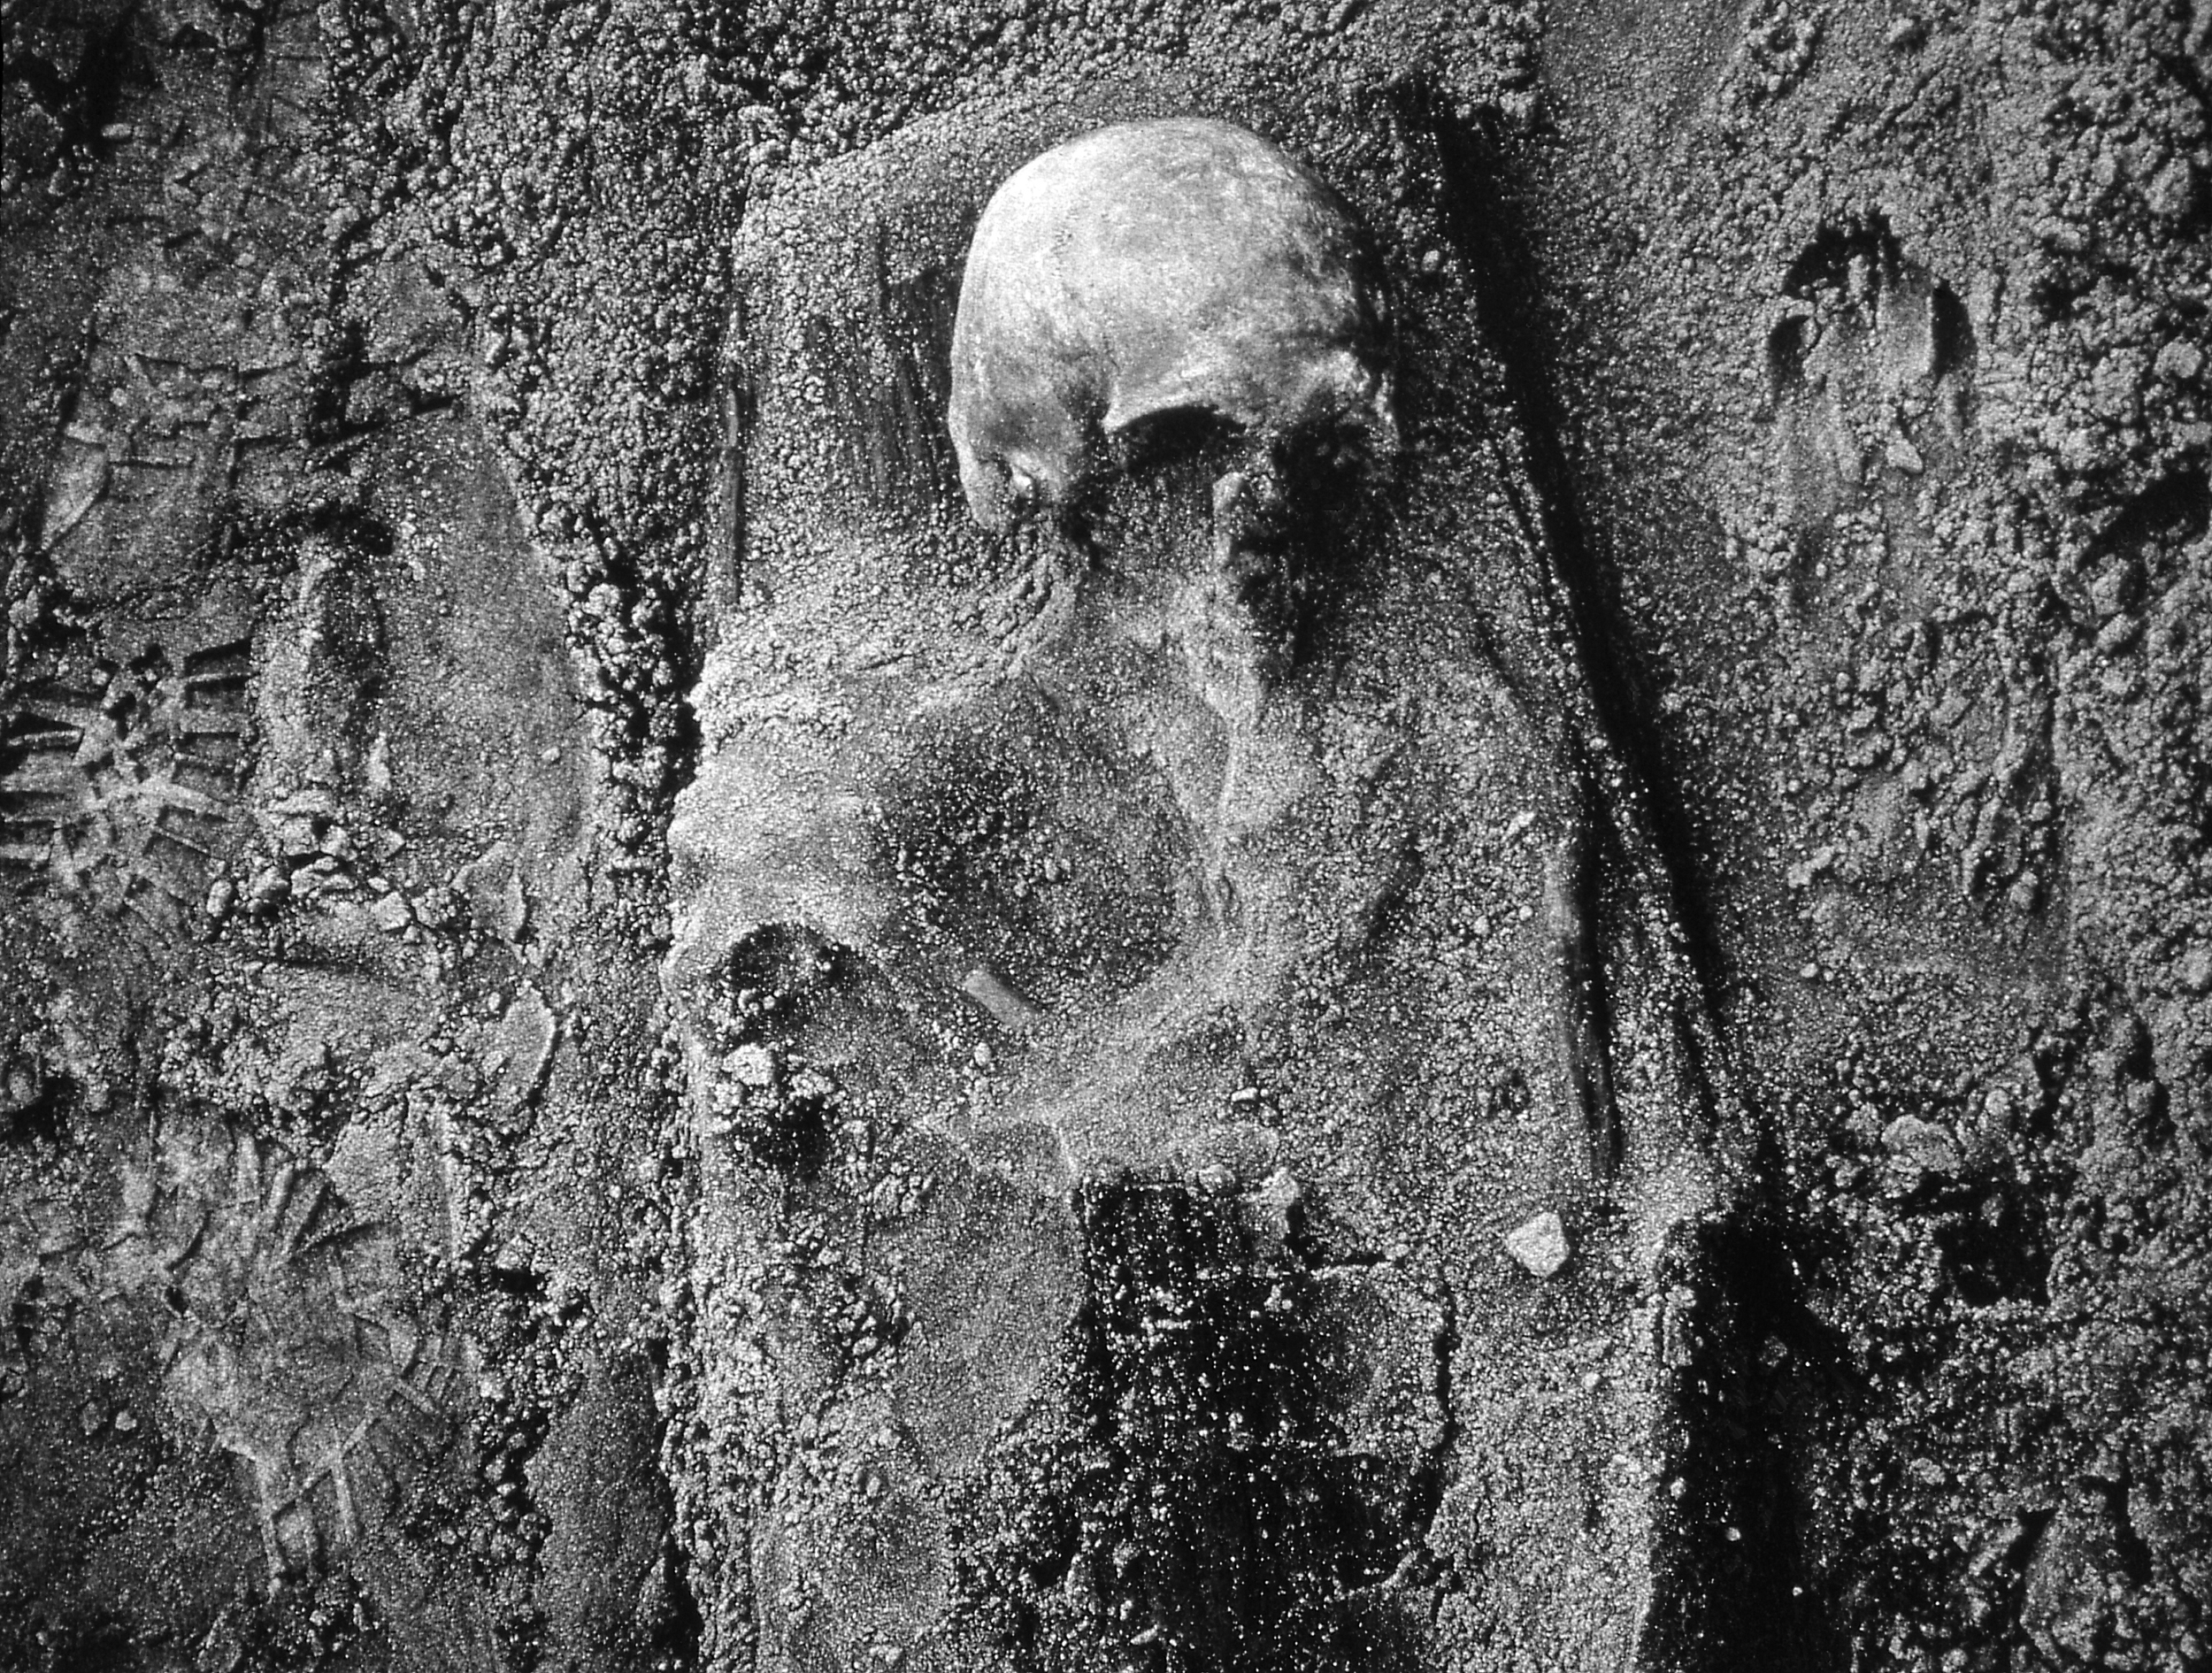  Skull With Footprints, 1994 